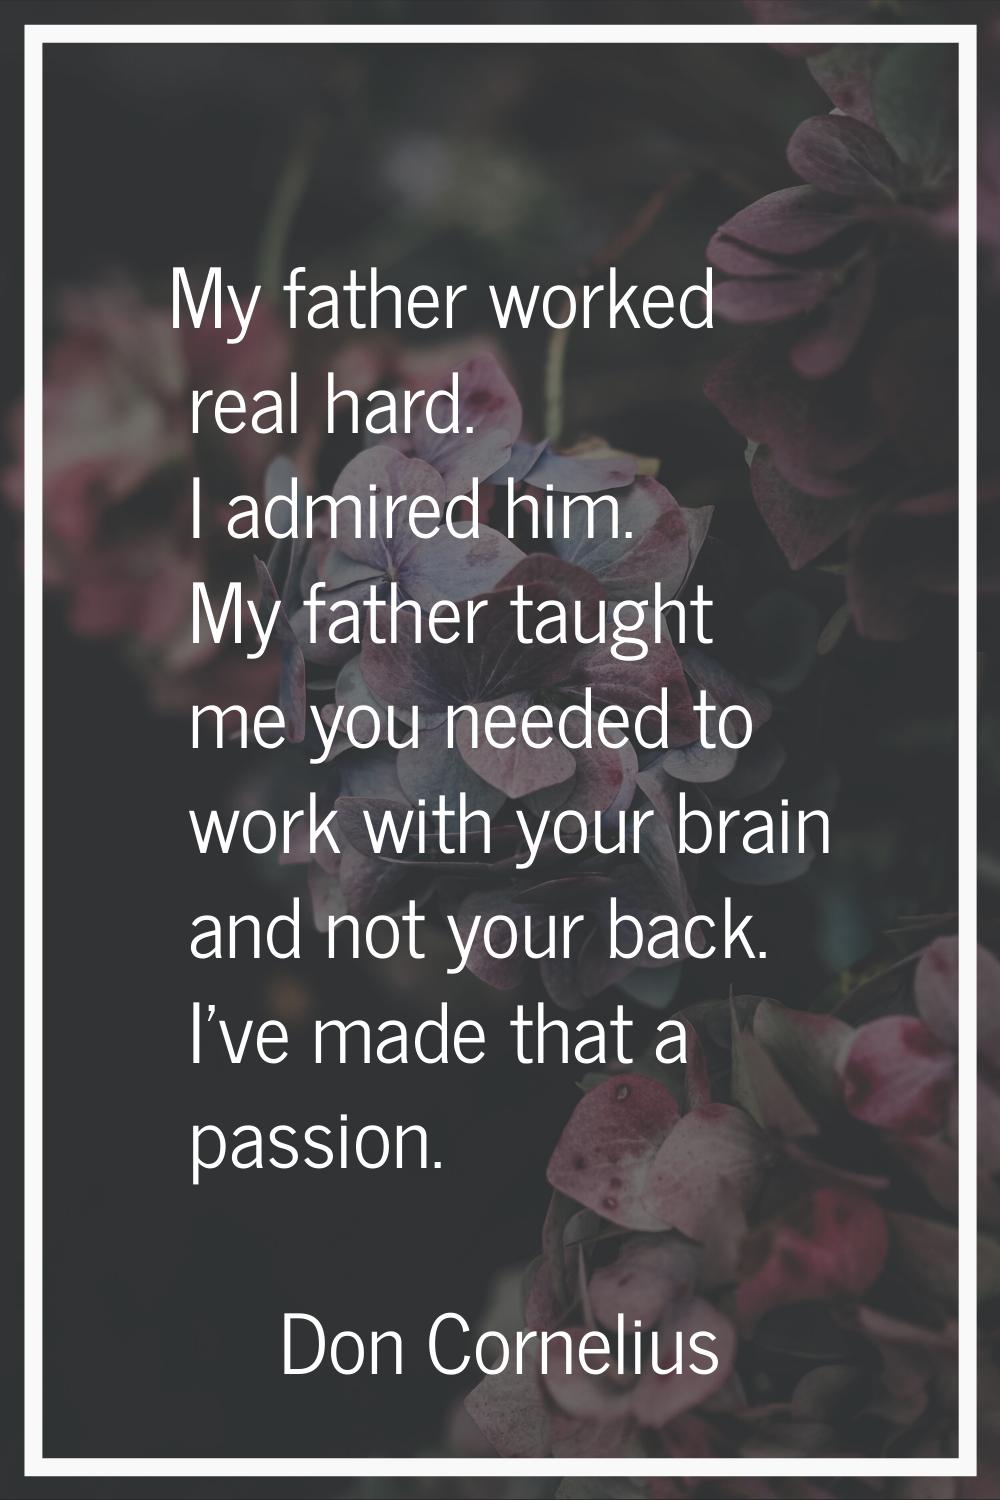 My father worked real hard. I admired him. My father taught me you needed to work with your brain a